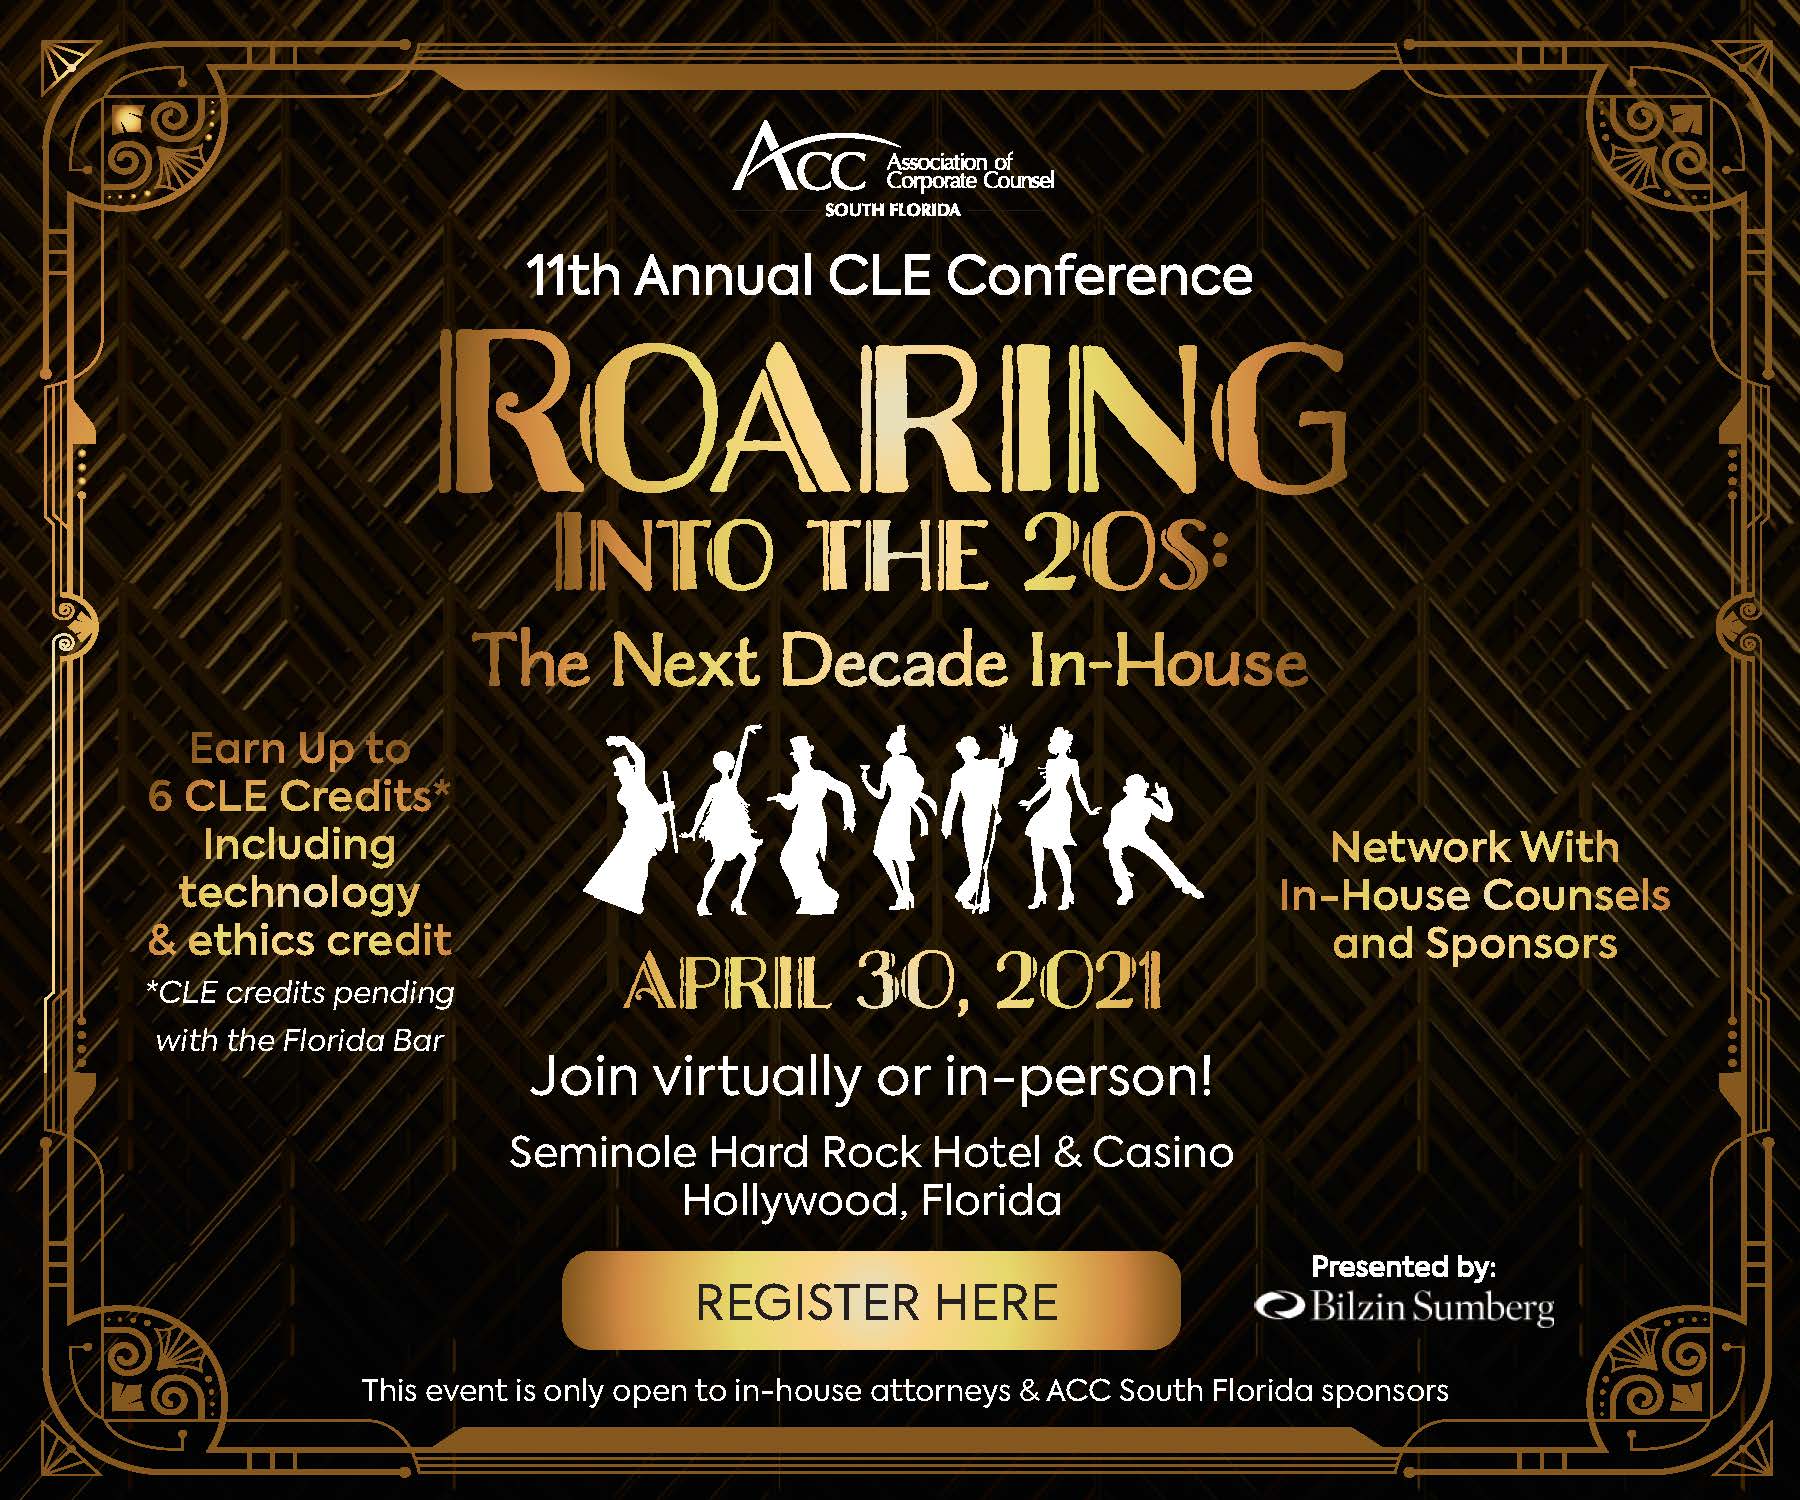 11th Annual CLE Conference Roaring Into the 20s The Next Decade In